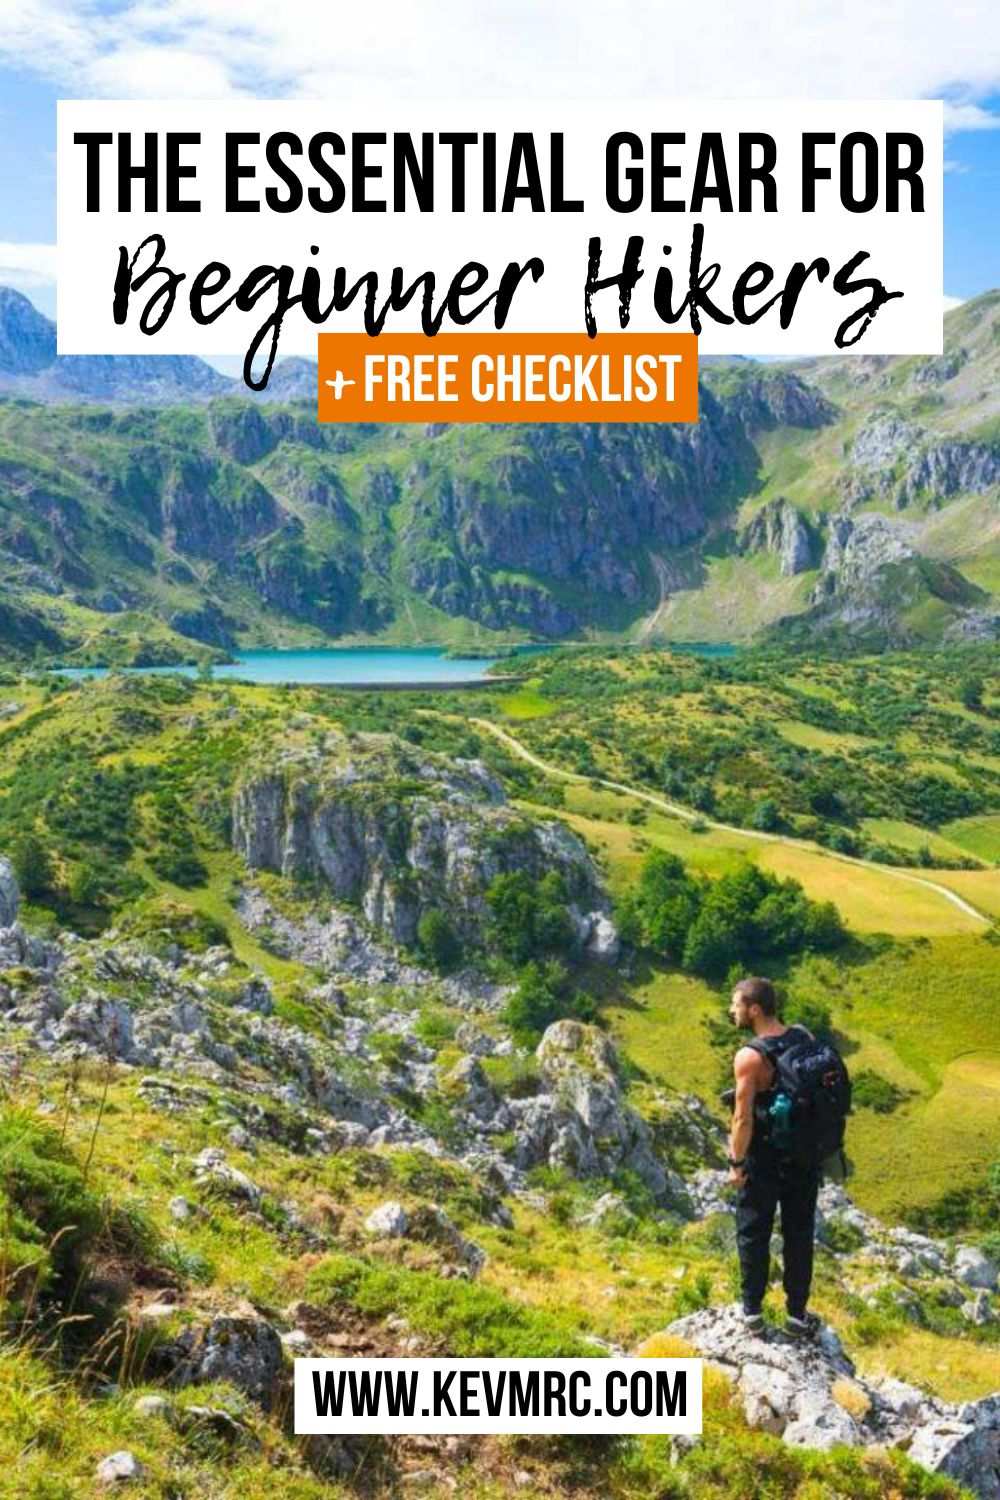 New to hiking? Pack in minutes thanks to this essential hiking gear list for beginners! You'll find a full printable gear checklist as well as tips to guide you in your first backpacking trip. day hike gear list | best hiking gear for beginners | hiking equipment backpacking gear | beginner backpacking gear list